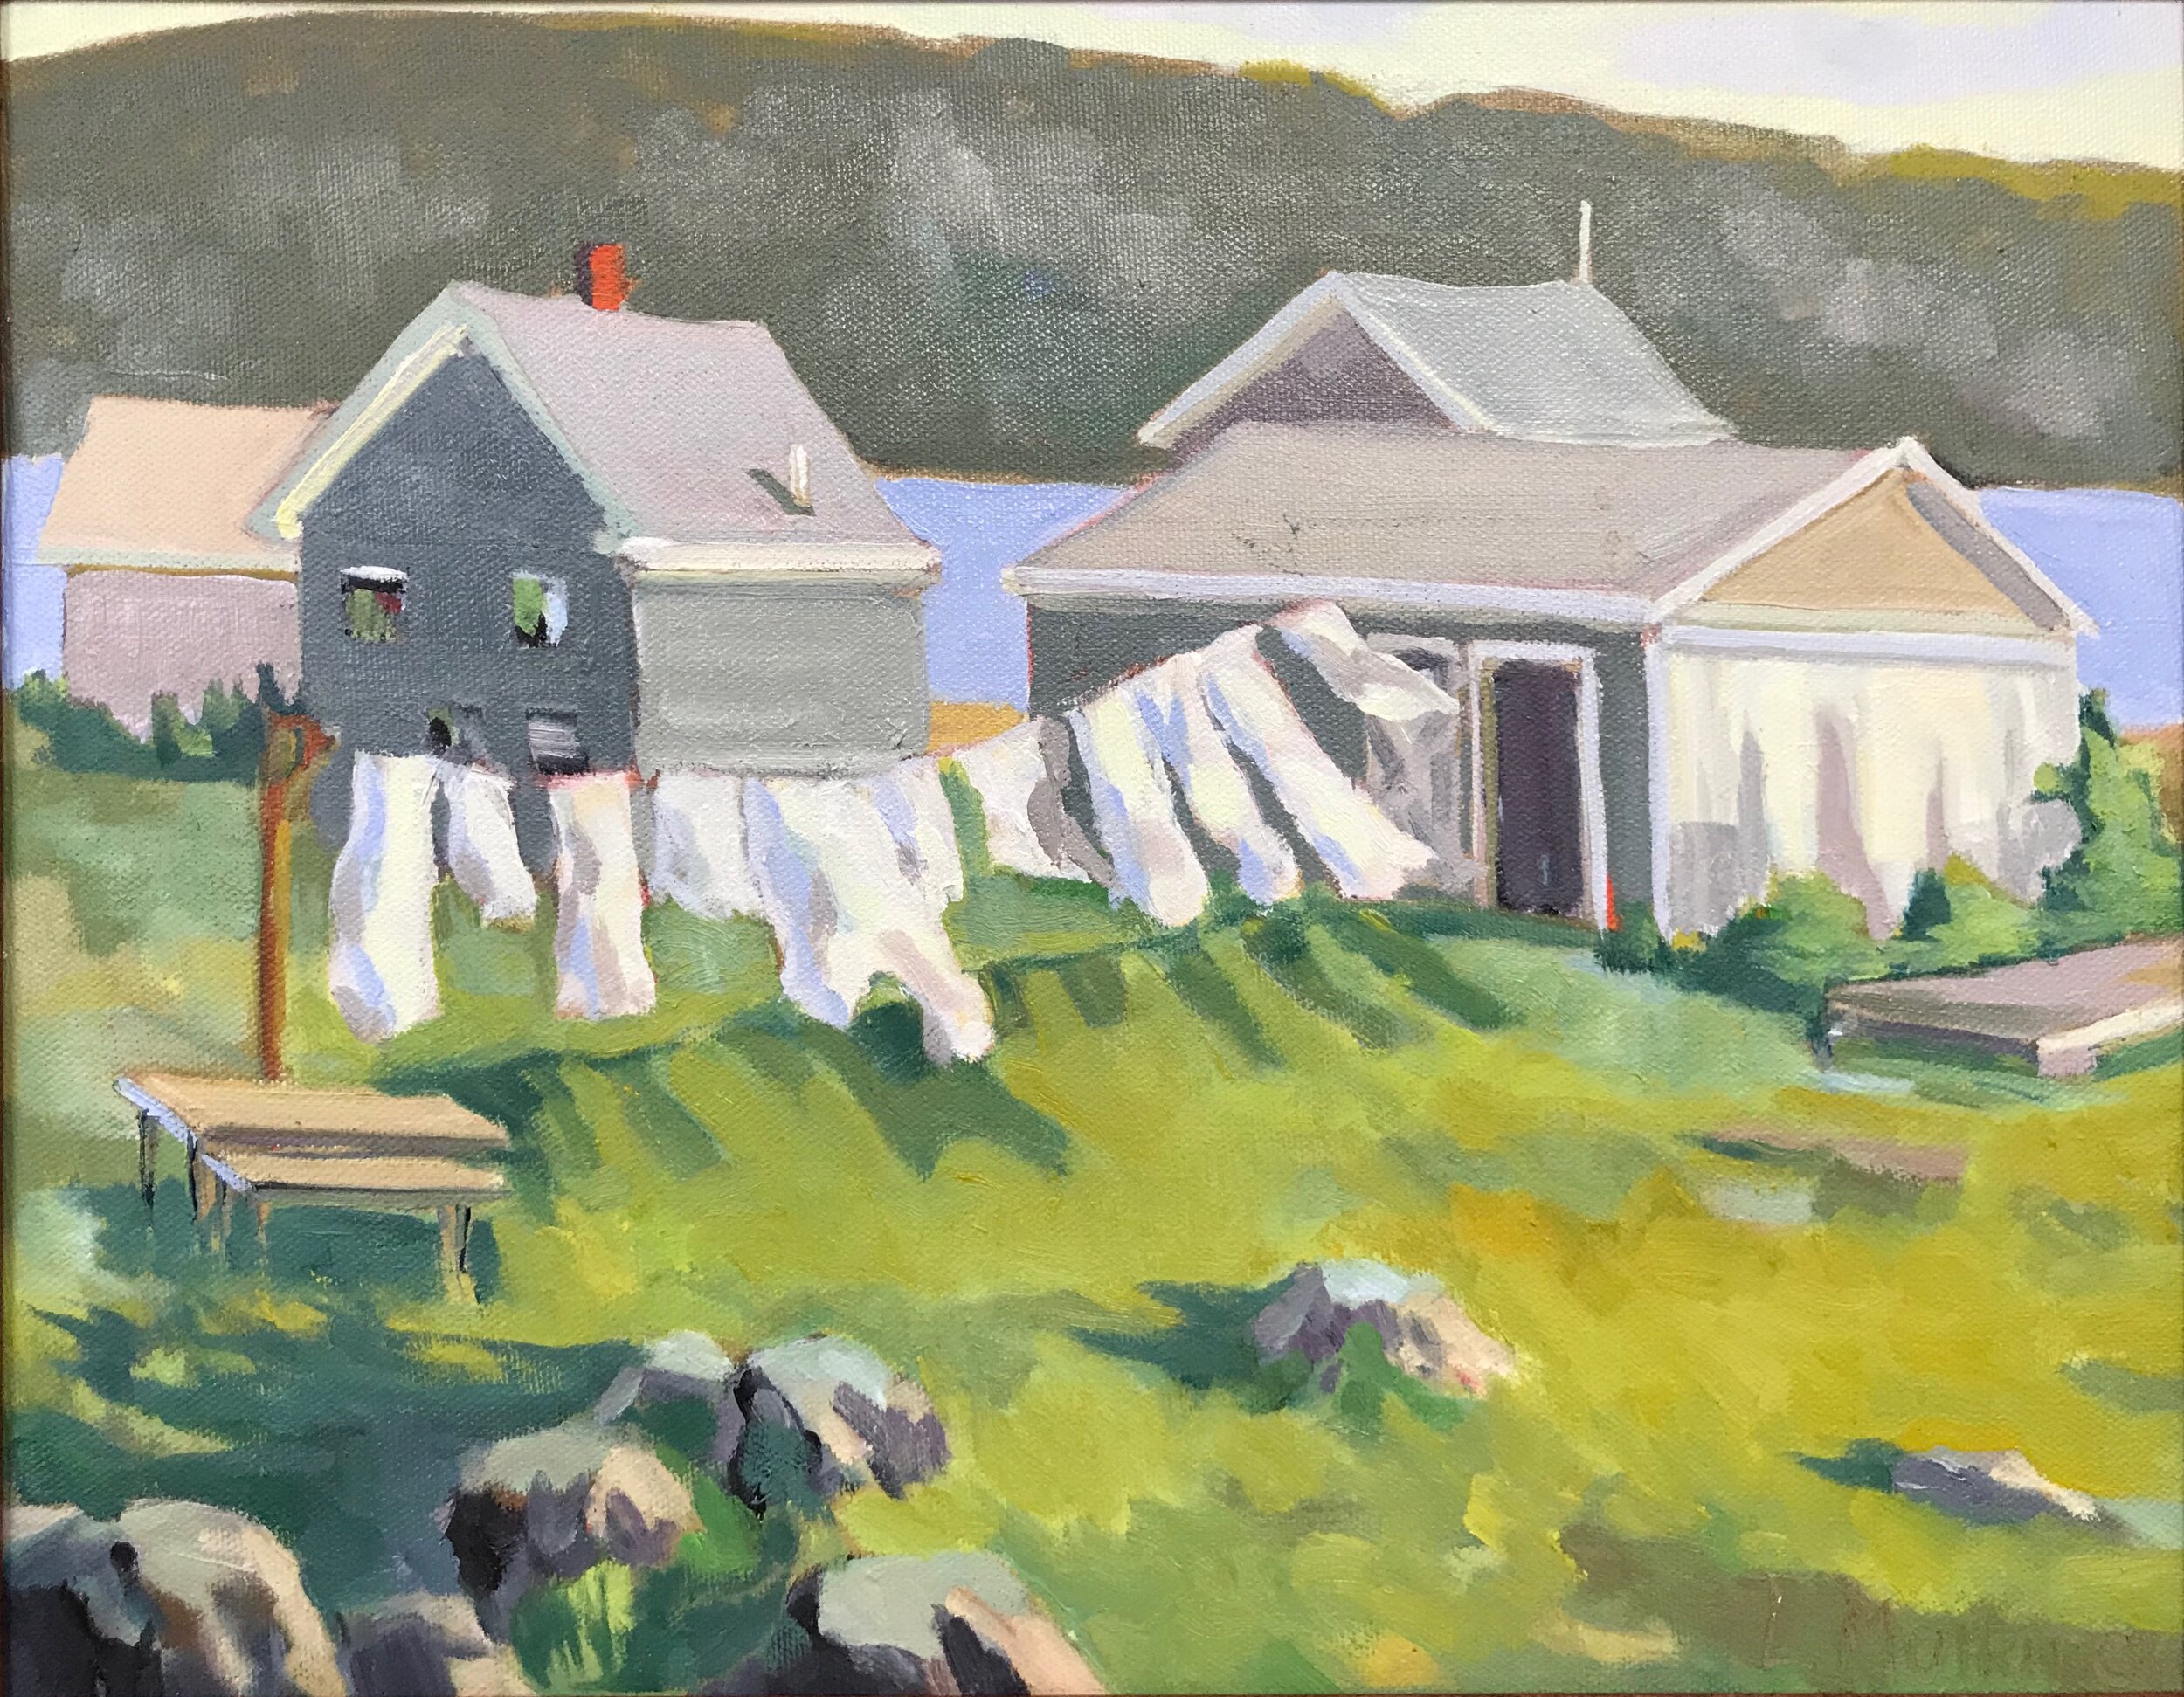 Laundry Day, oil on linen, 11 x 14 SOLD